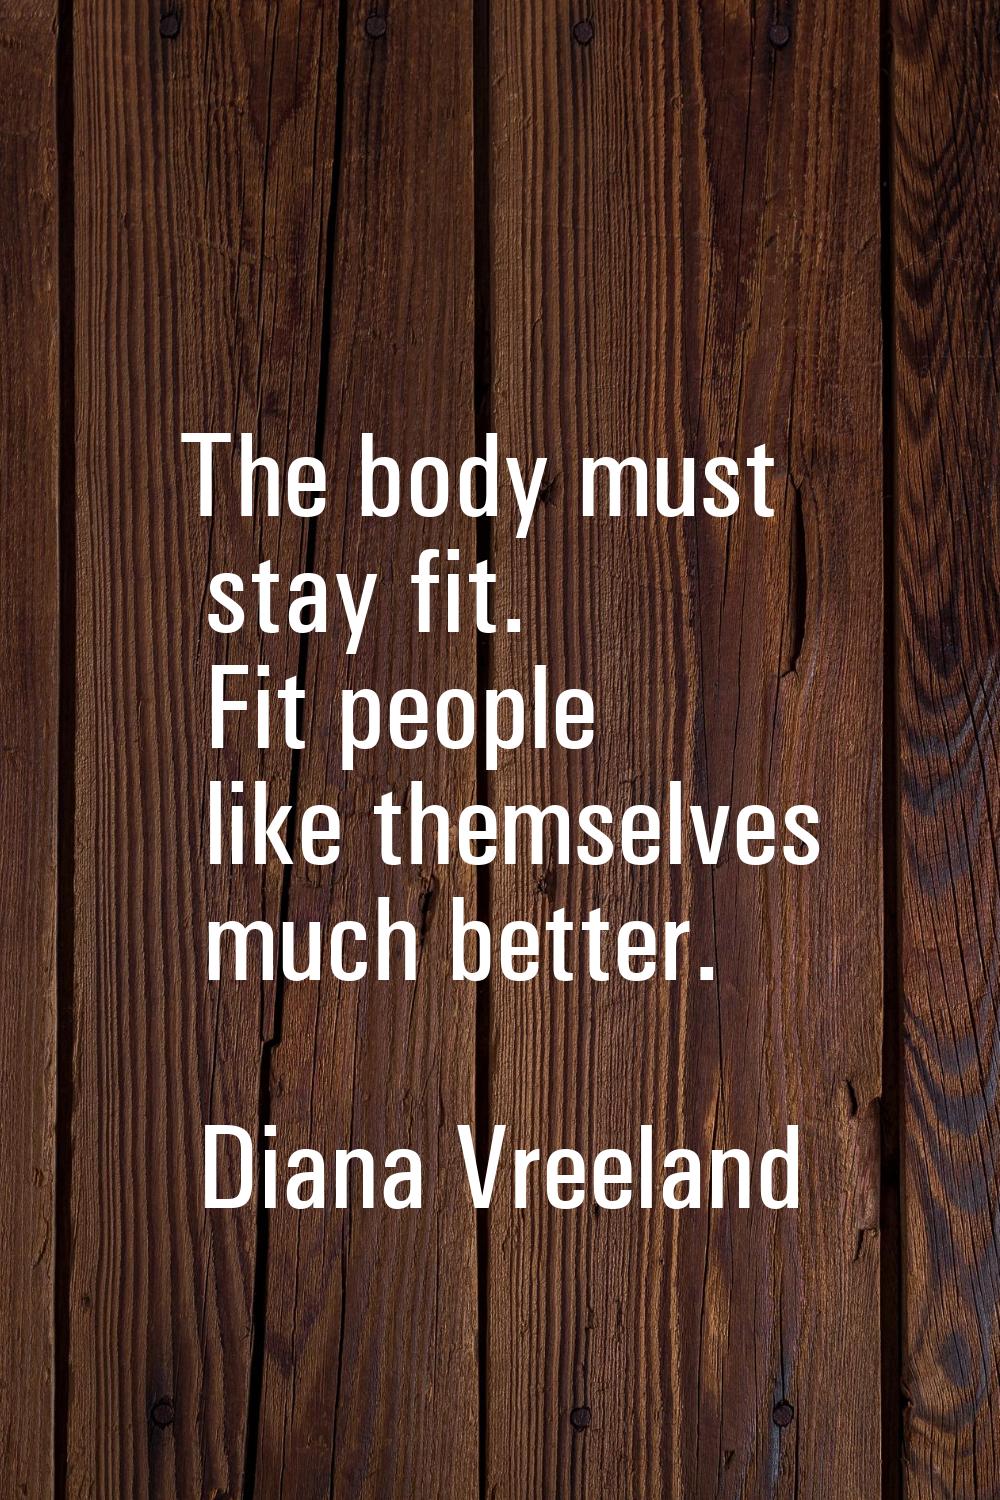 The body must stay fit. Fit people like themselves much better.